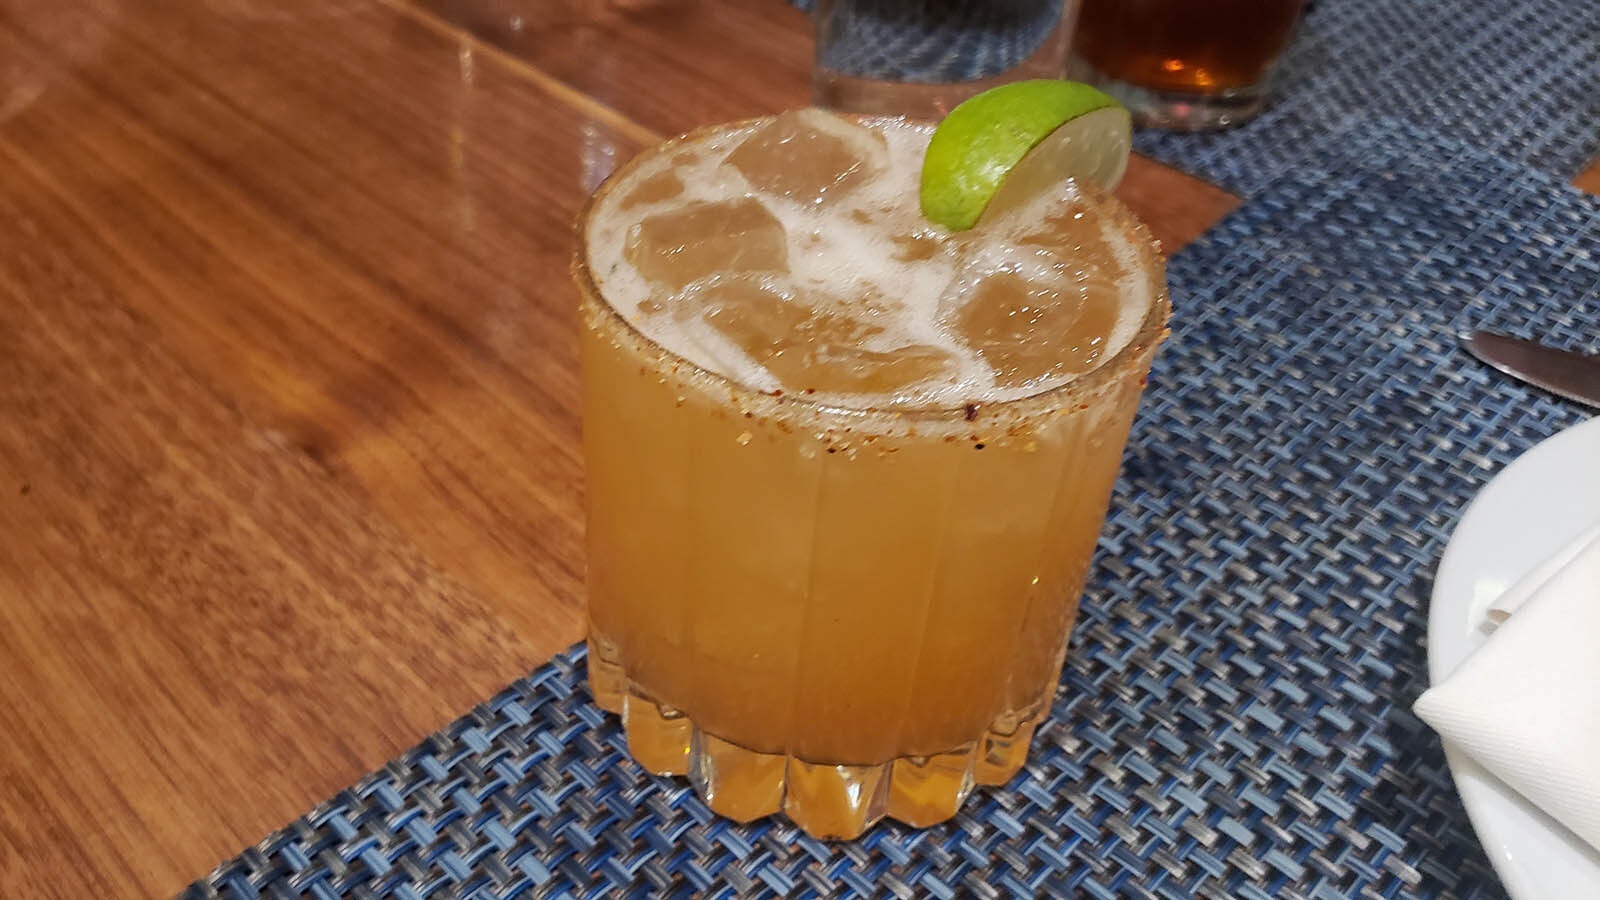 Figs offers a range of specialty cocktails as well as this mocktail.